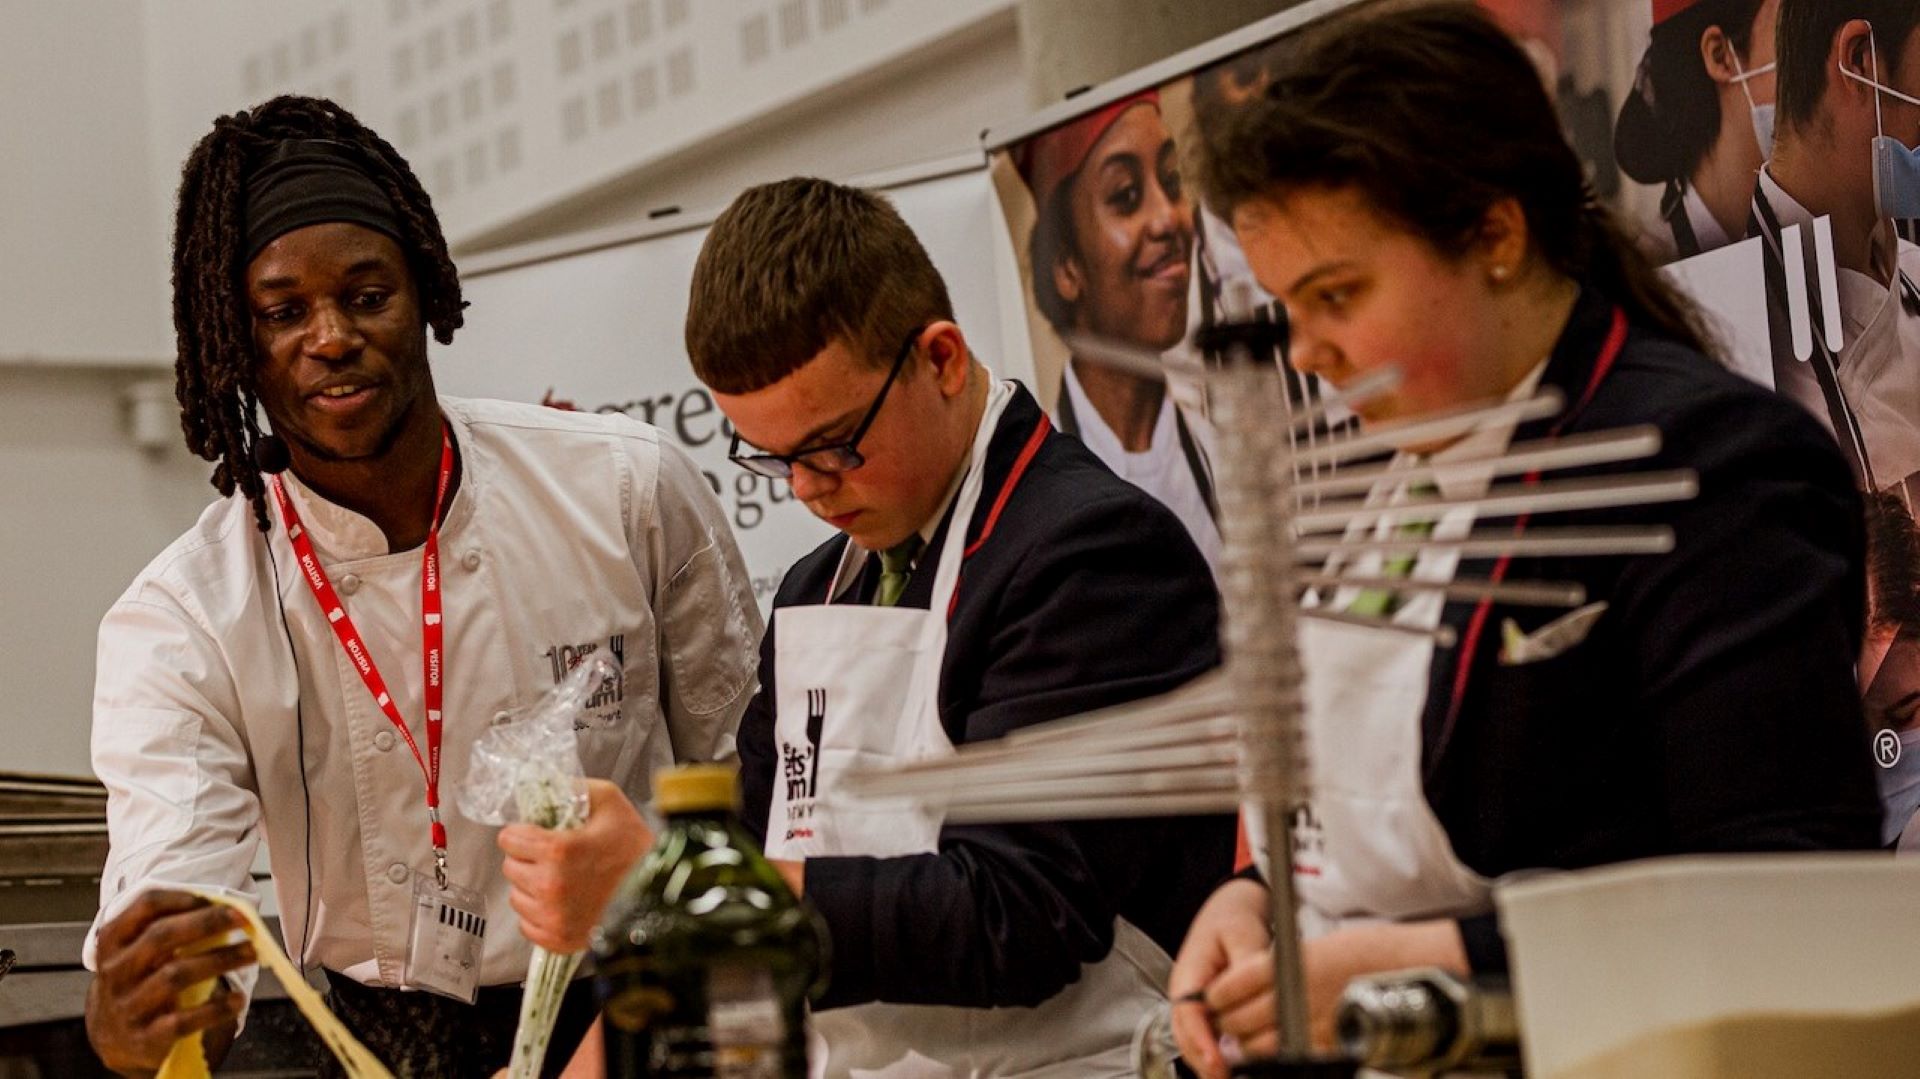 Students from the Bradford area were inspired after two hours of tasting, demonstrations, and a competition at Bradford College.